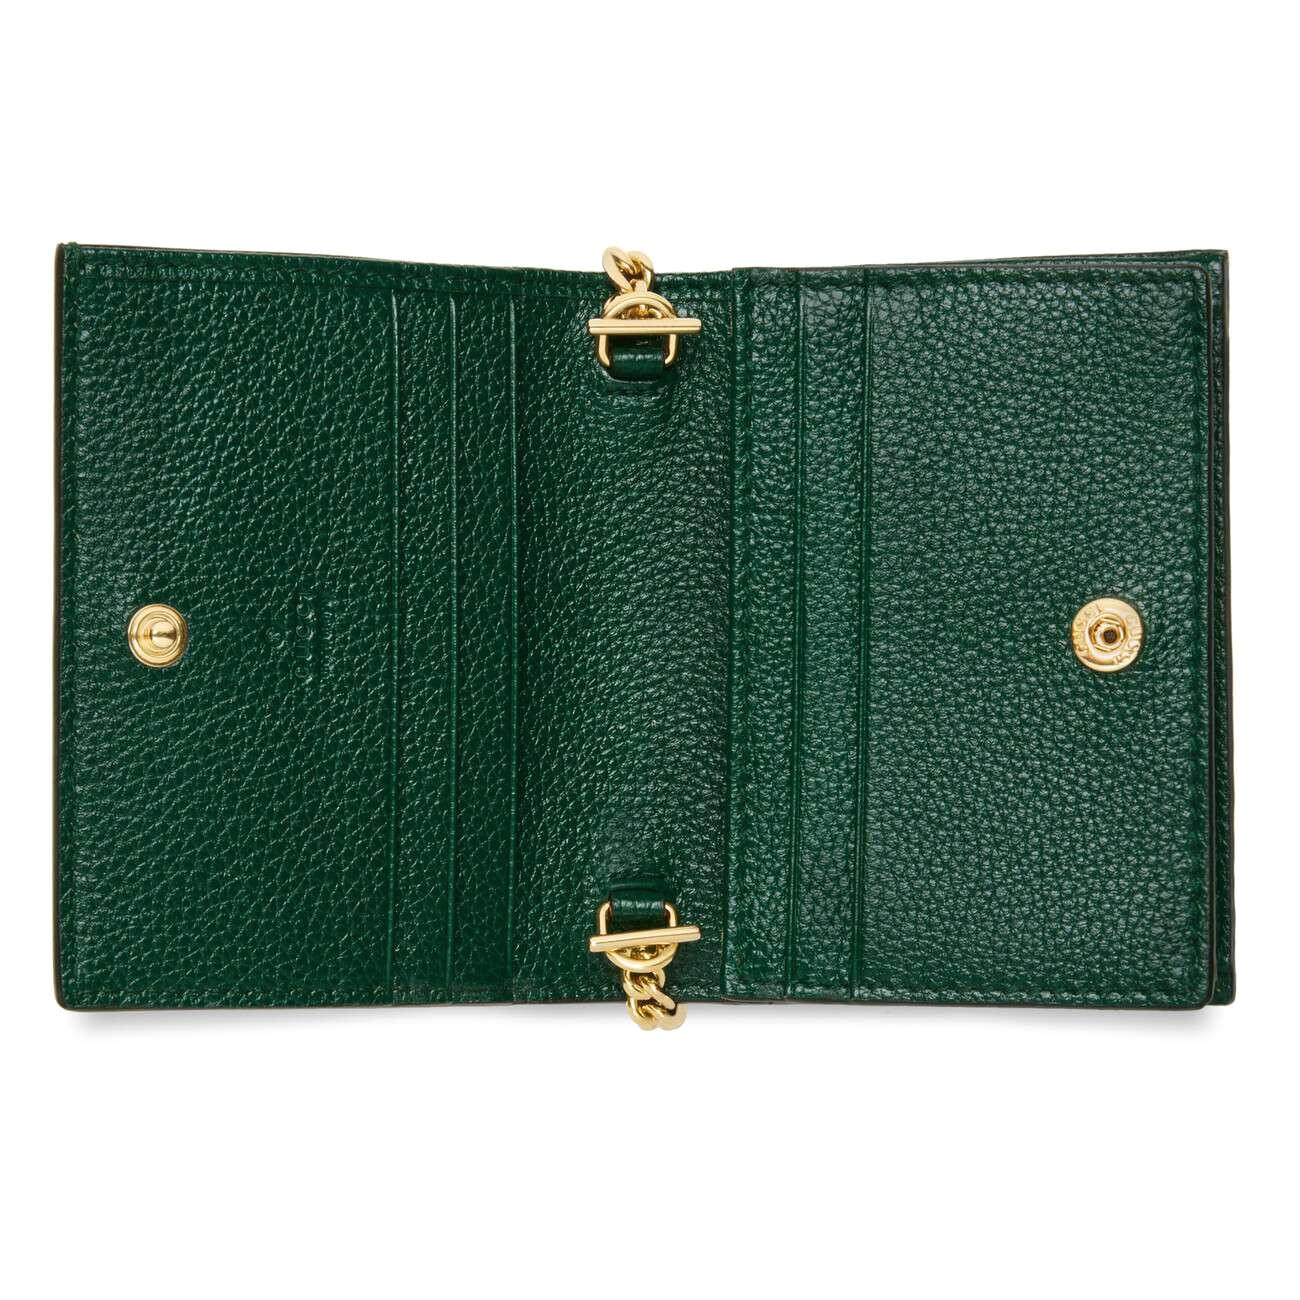 gucci dark green grainy leather zumi grainy leather card case wallet jpeg